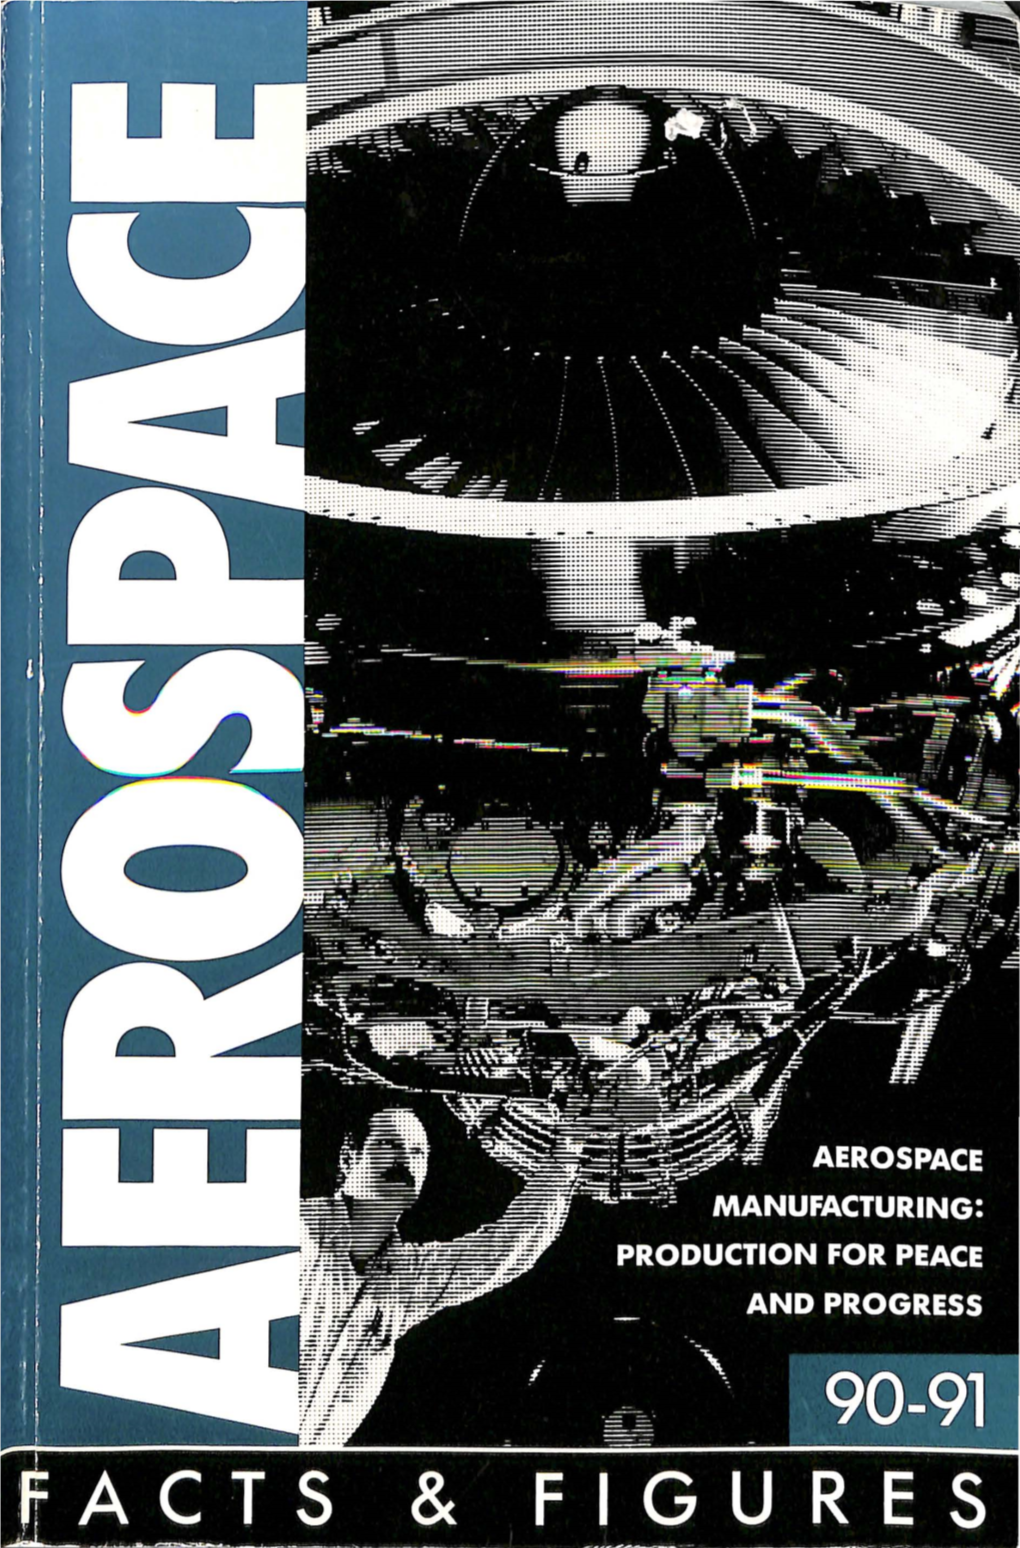 Aerospace-Facts-And-Figures-1990-1991.Pdf